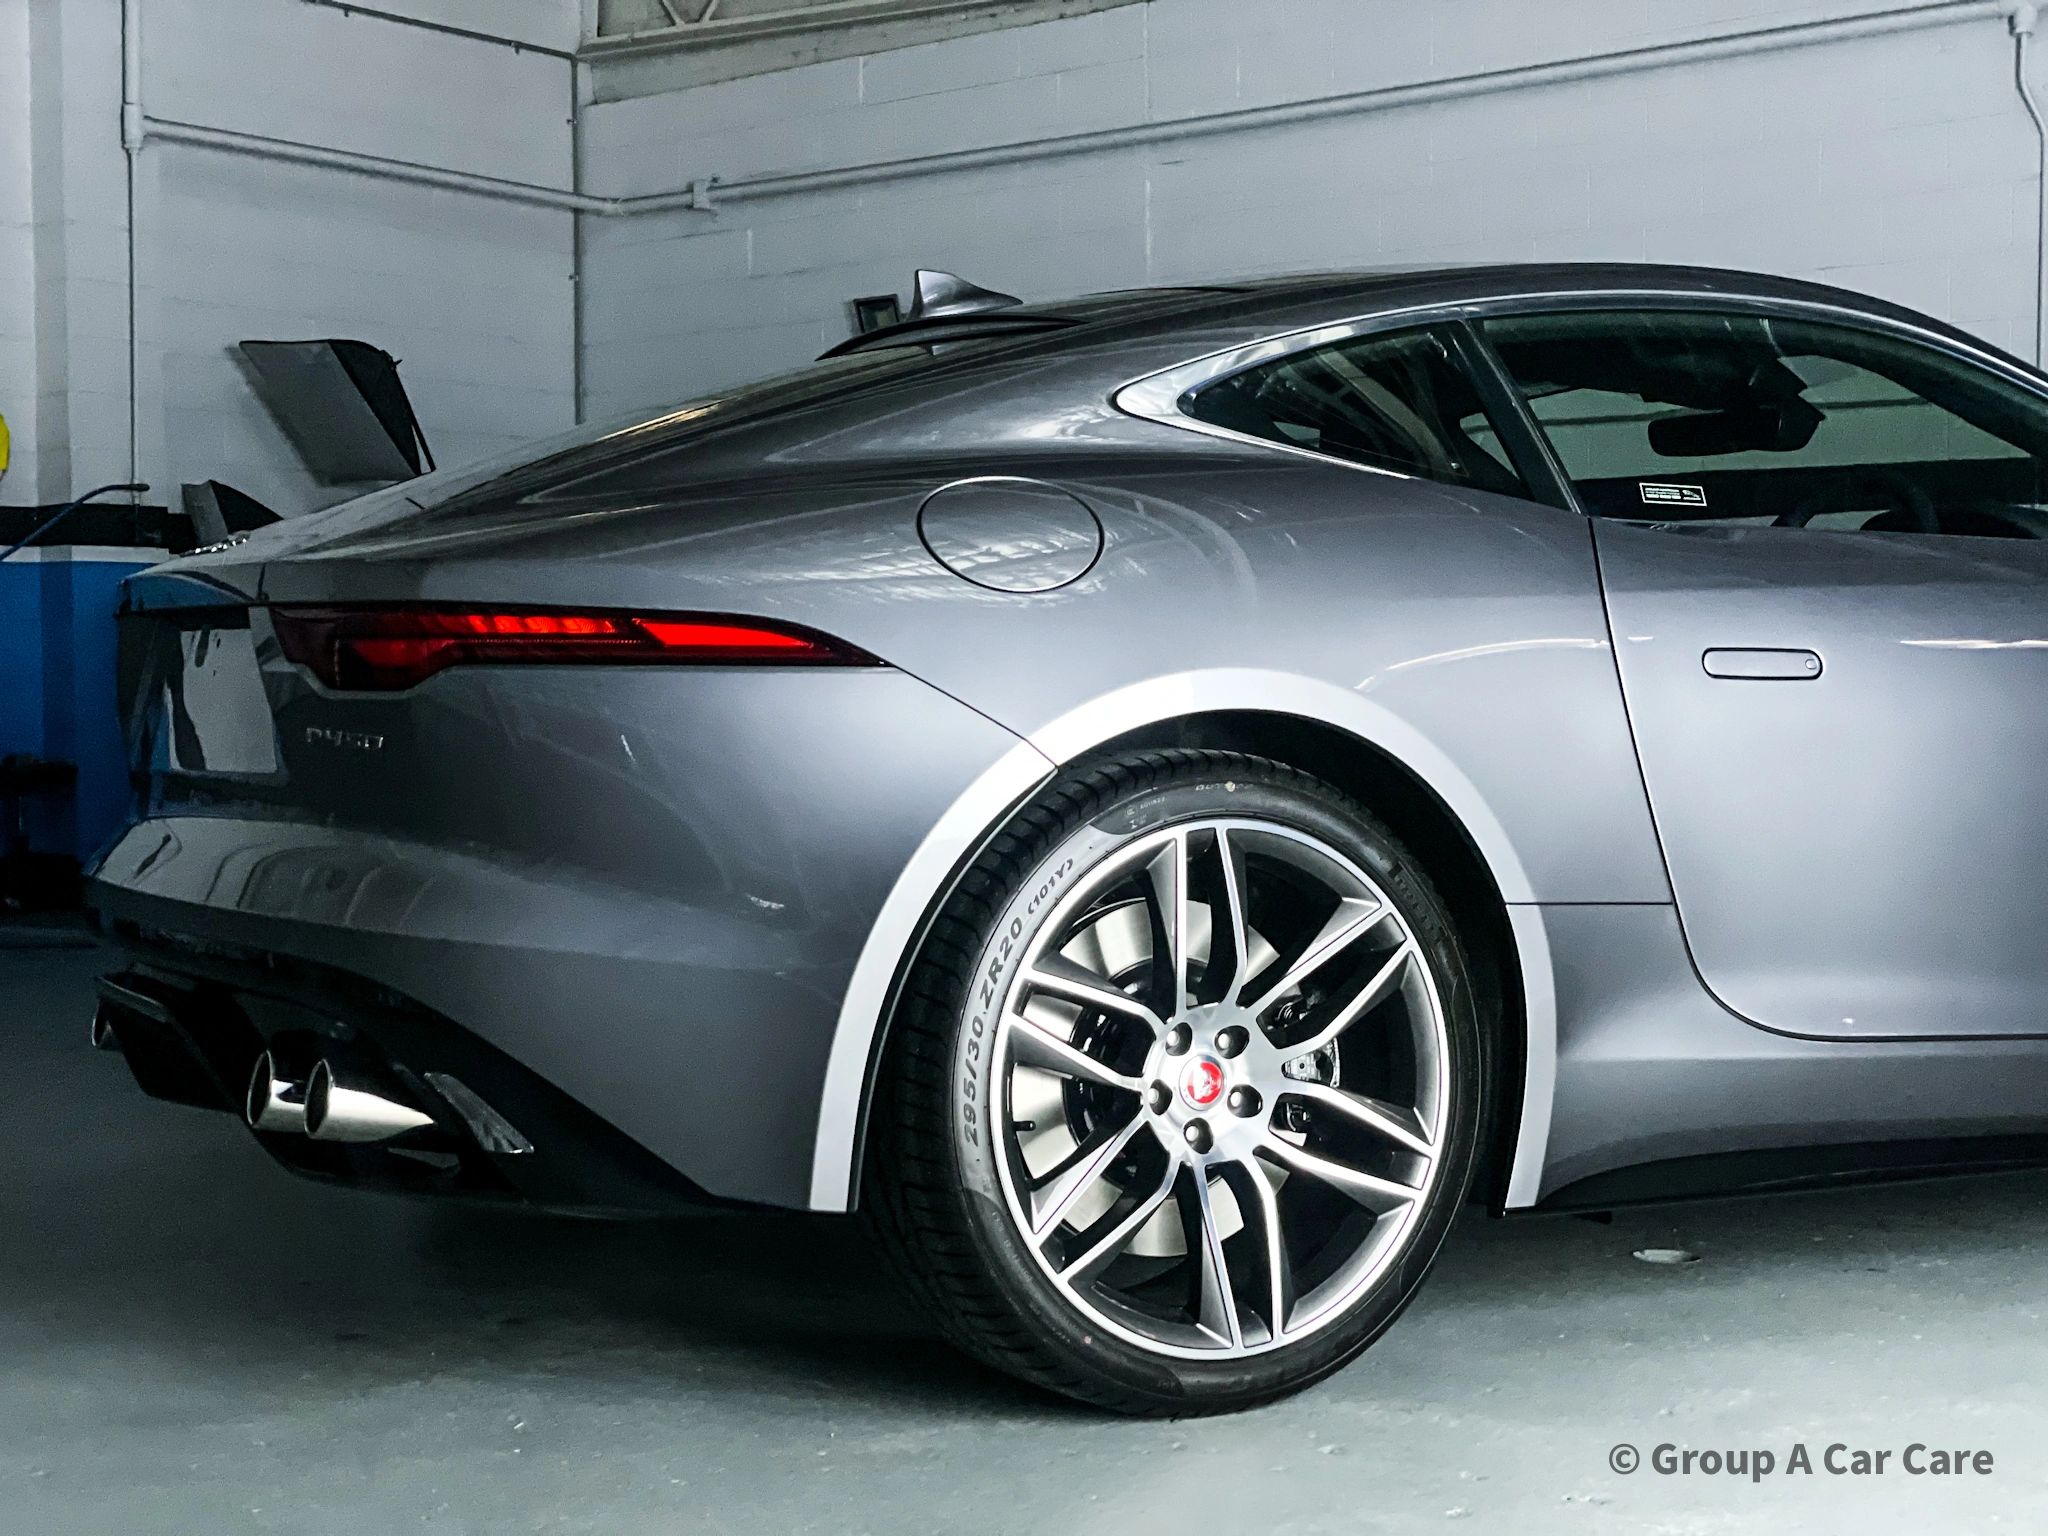 Ceramic Paint Protection on Jaguar F-type. Washing made easy with ceramic paint coating